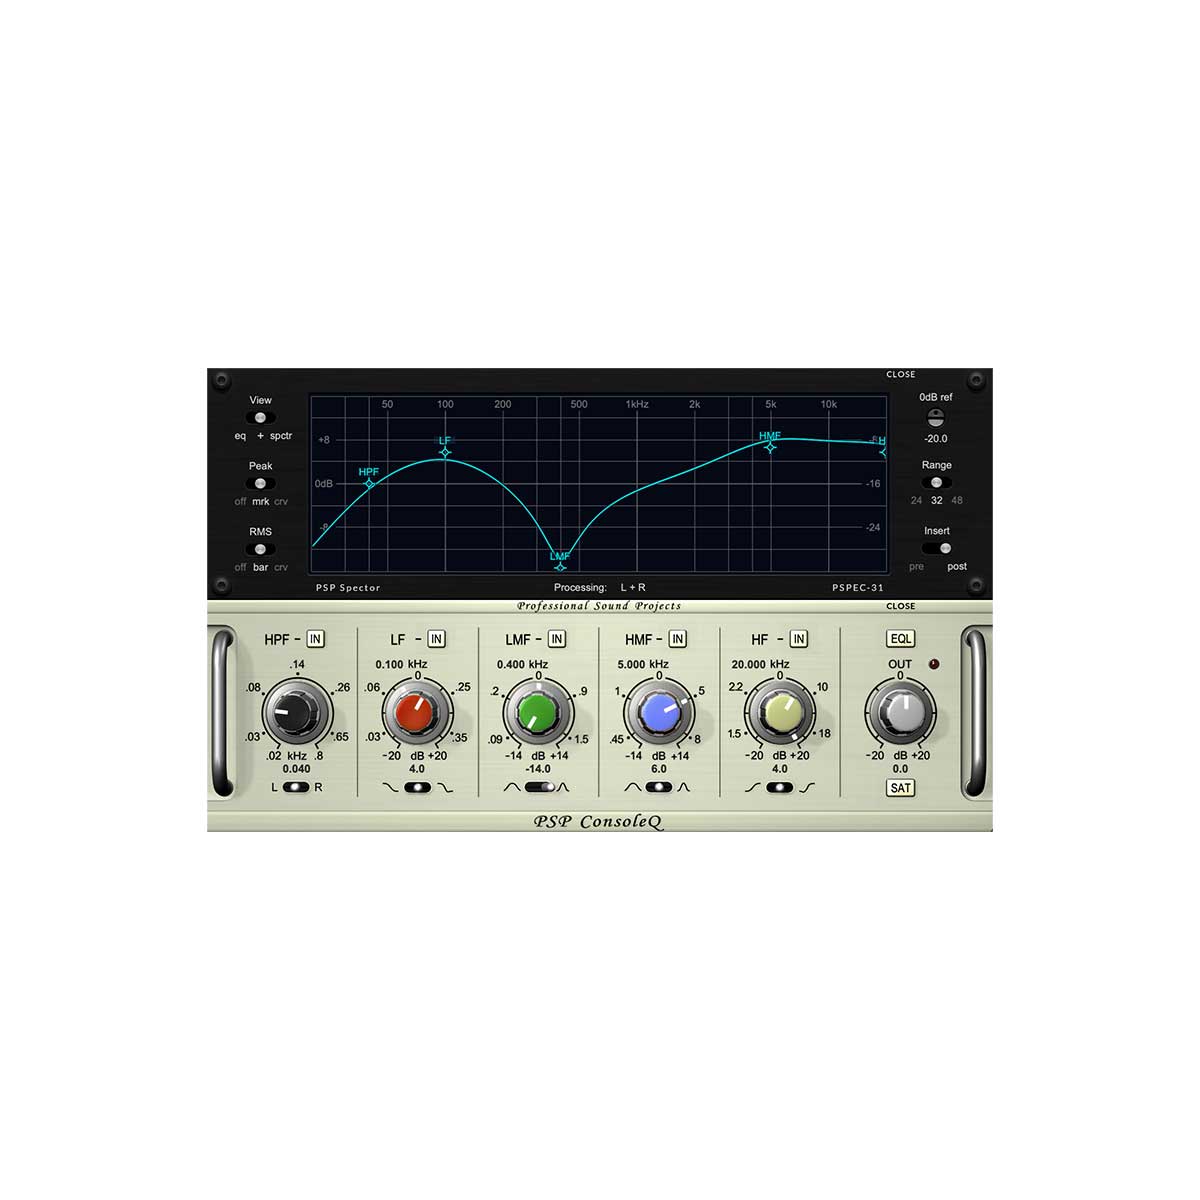 PSP ConsoleQ v2 British Console Style Equaliser Plug-In (Serial Nr + Download)